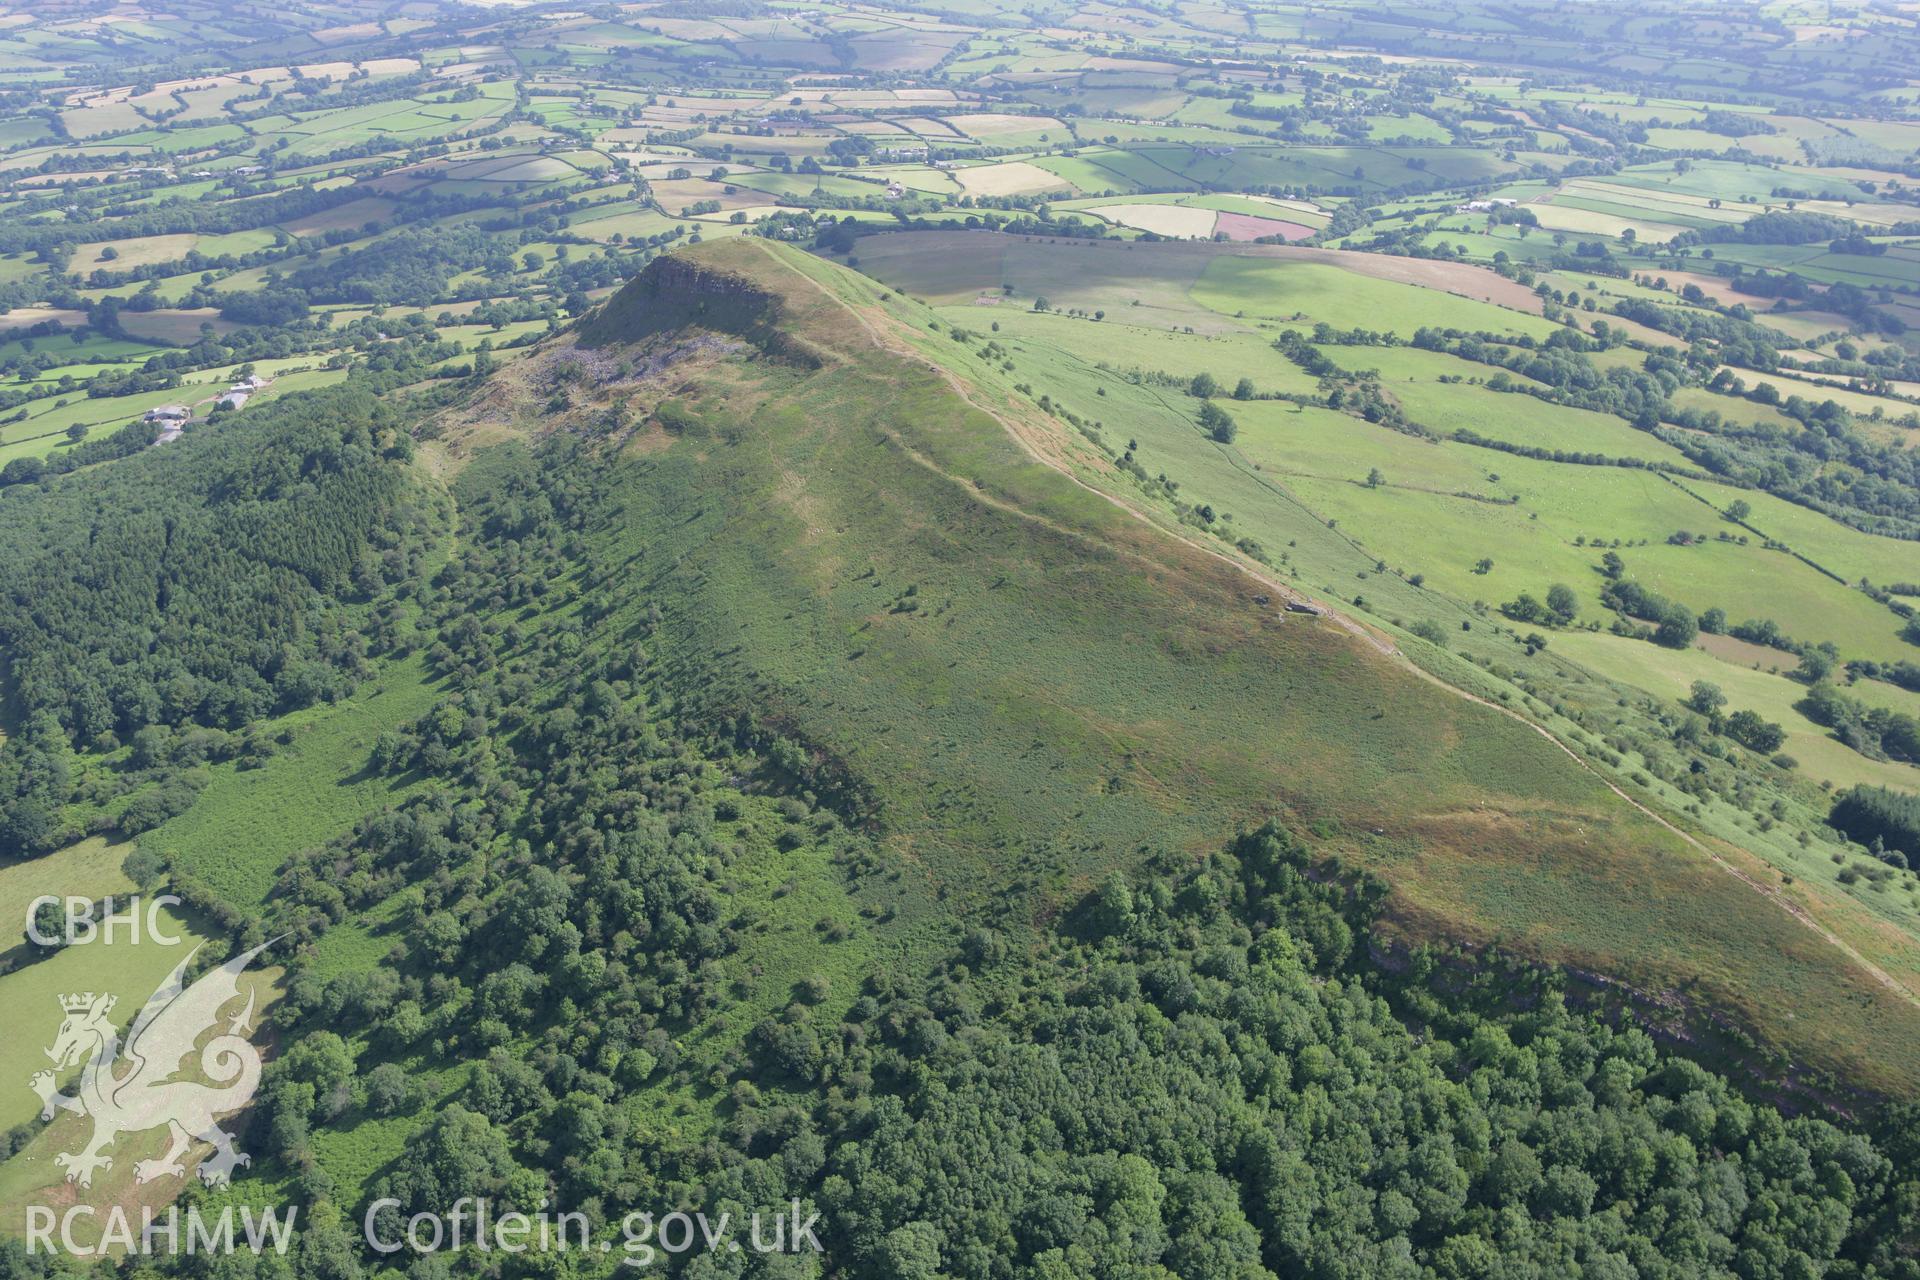 RCAHMW colour oblique photograph of Skirrid Fawr Summit Enclosure, from the south-west. Taken by Toby Driver on 21/07/2008.